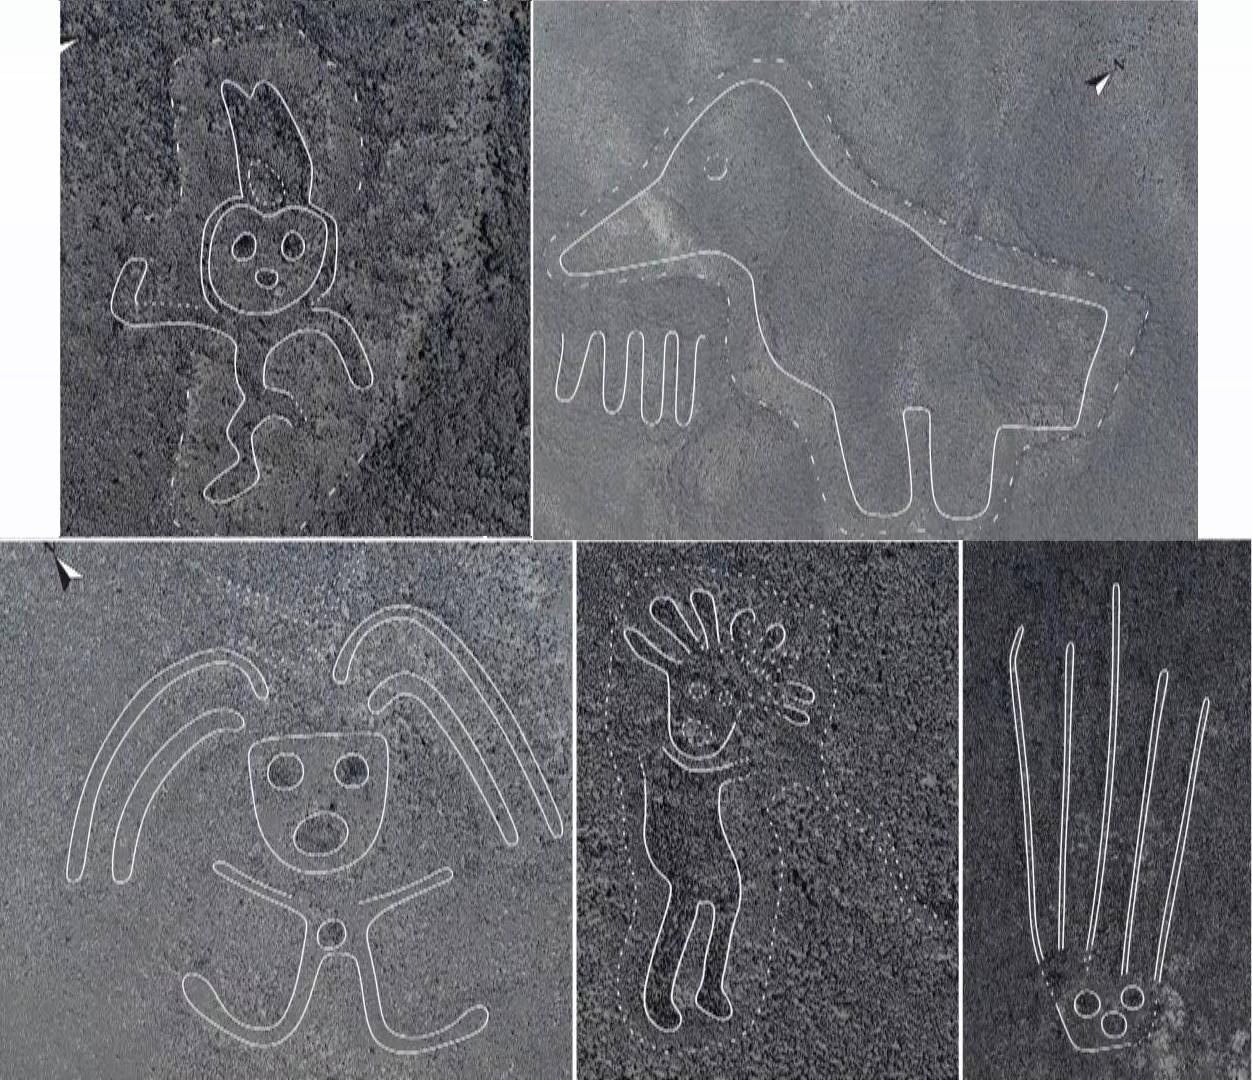 Japanese Archaeologists Spot More Than 150 New Nazca Lines in Peru Using Aerial Footage Taken by Drones